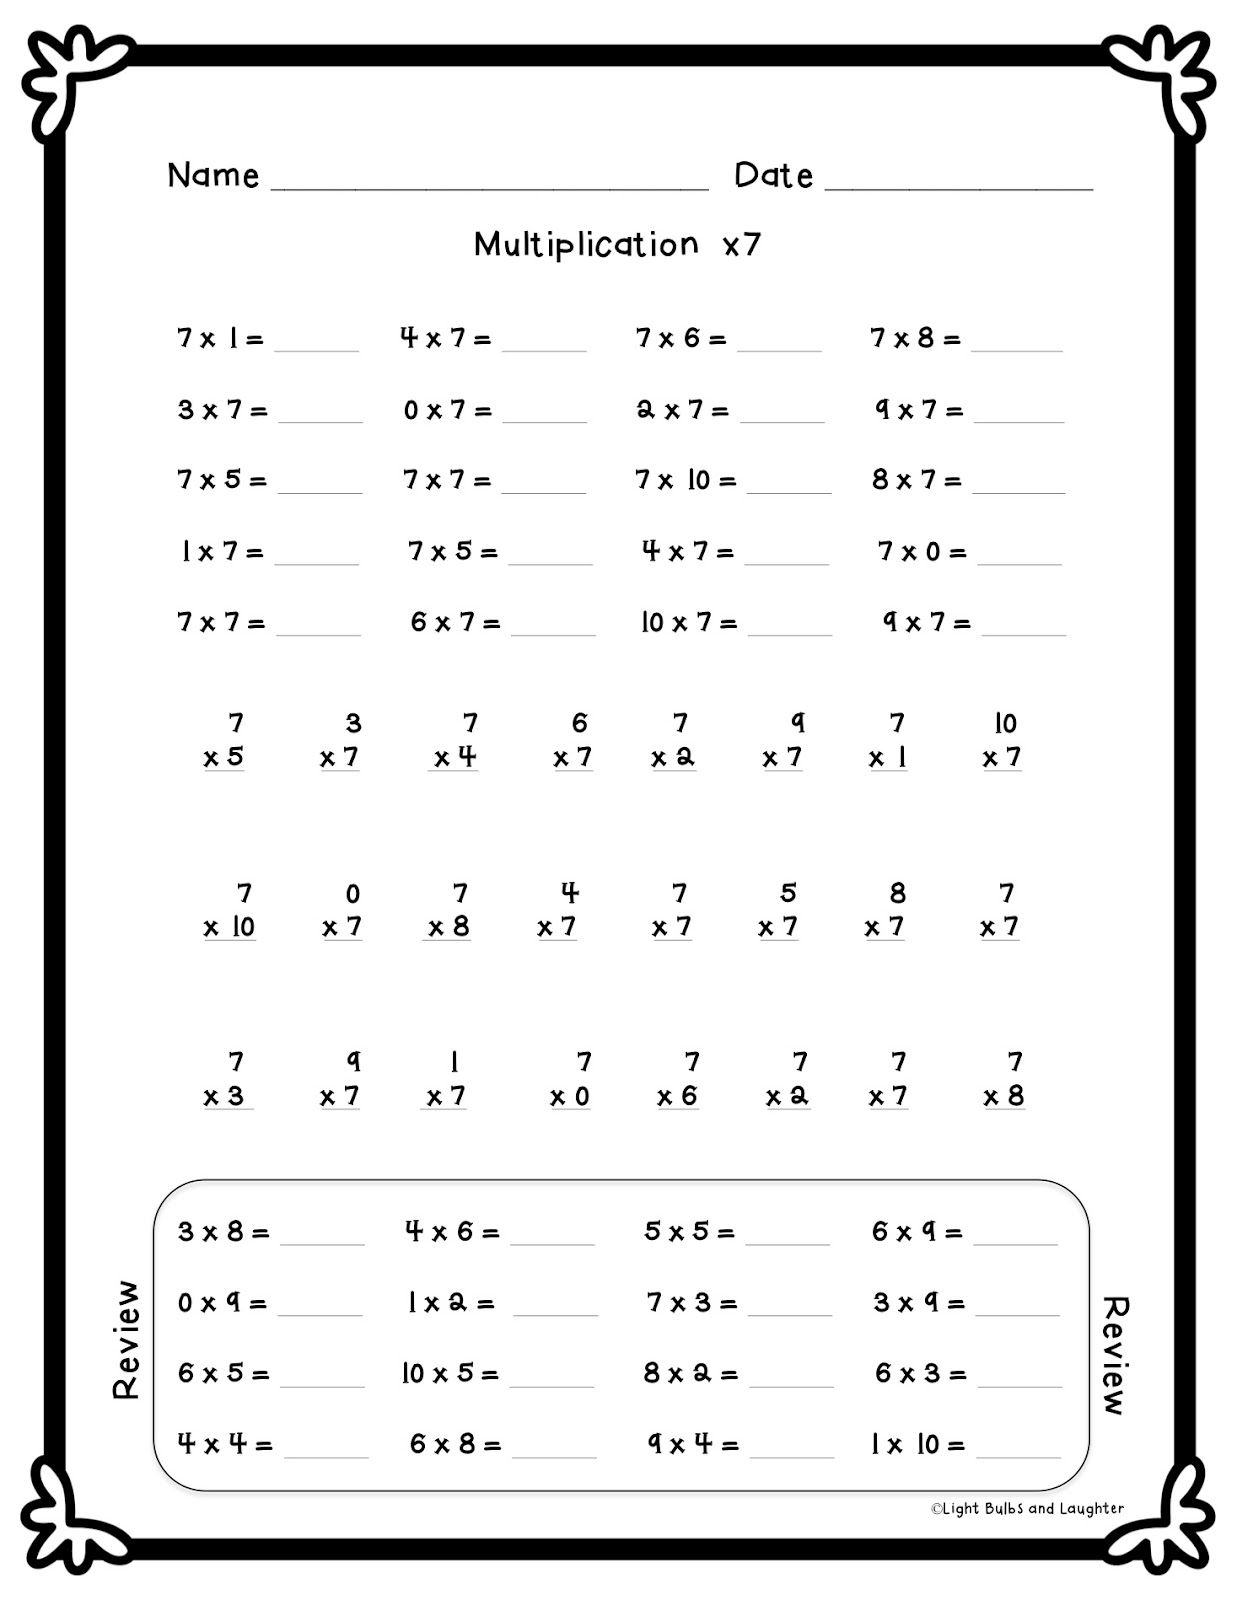 Multiplication Memorization Kit - Timed Tests - Light Bulbs and Laughter